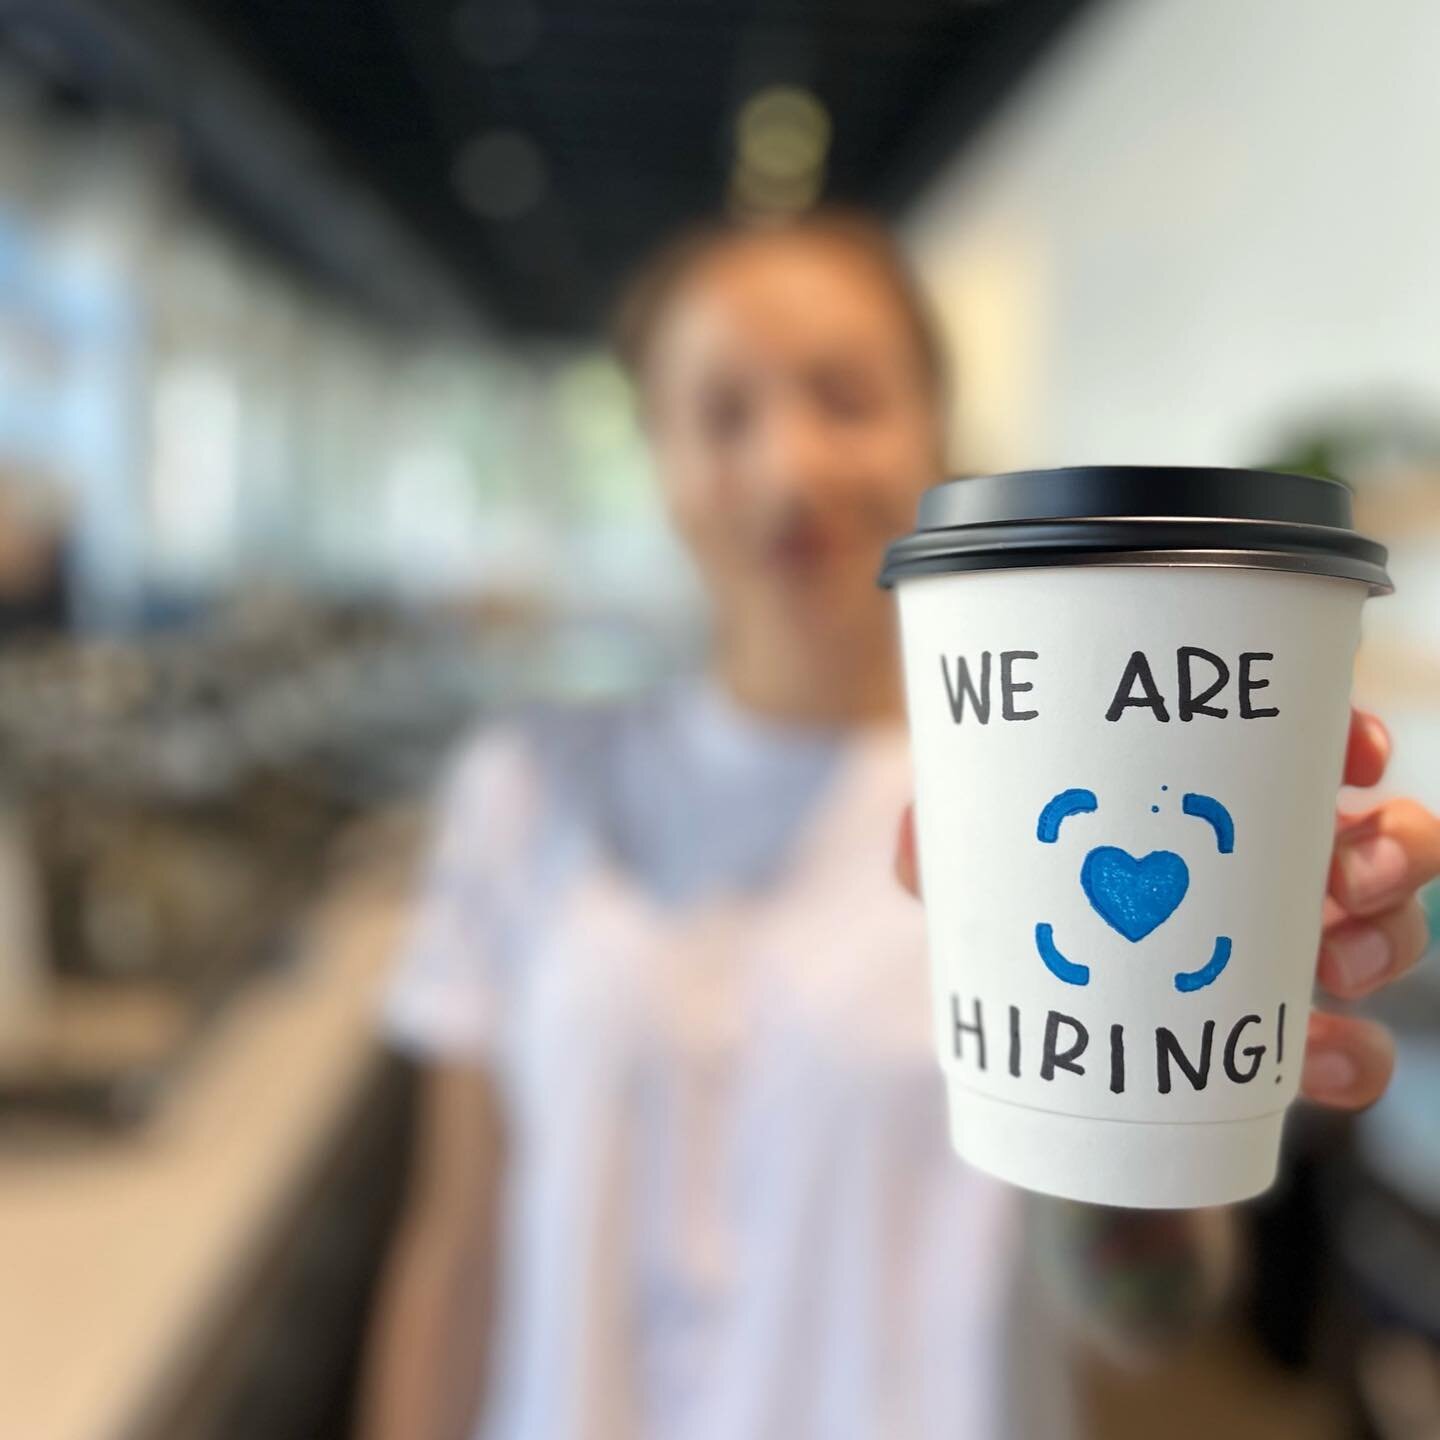 We&rsquo;re hiring! We are looking for a new part-time barista to join our team! If you think you might be a good fit, email your resume to info@blueprintcoffeeproject.com! Coffee experience preferred, fun-positive attitude required🤪🤘🏽

.
.
.
.
#o